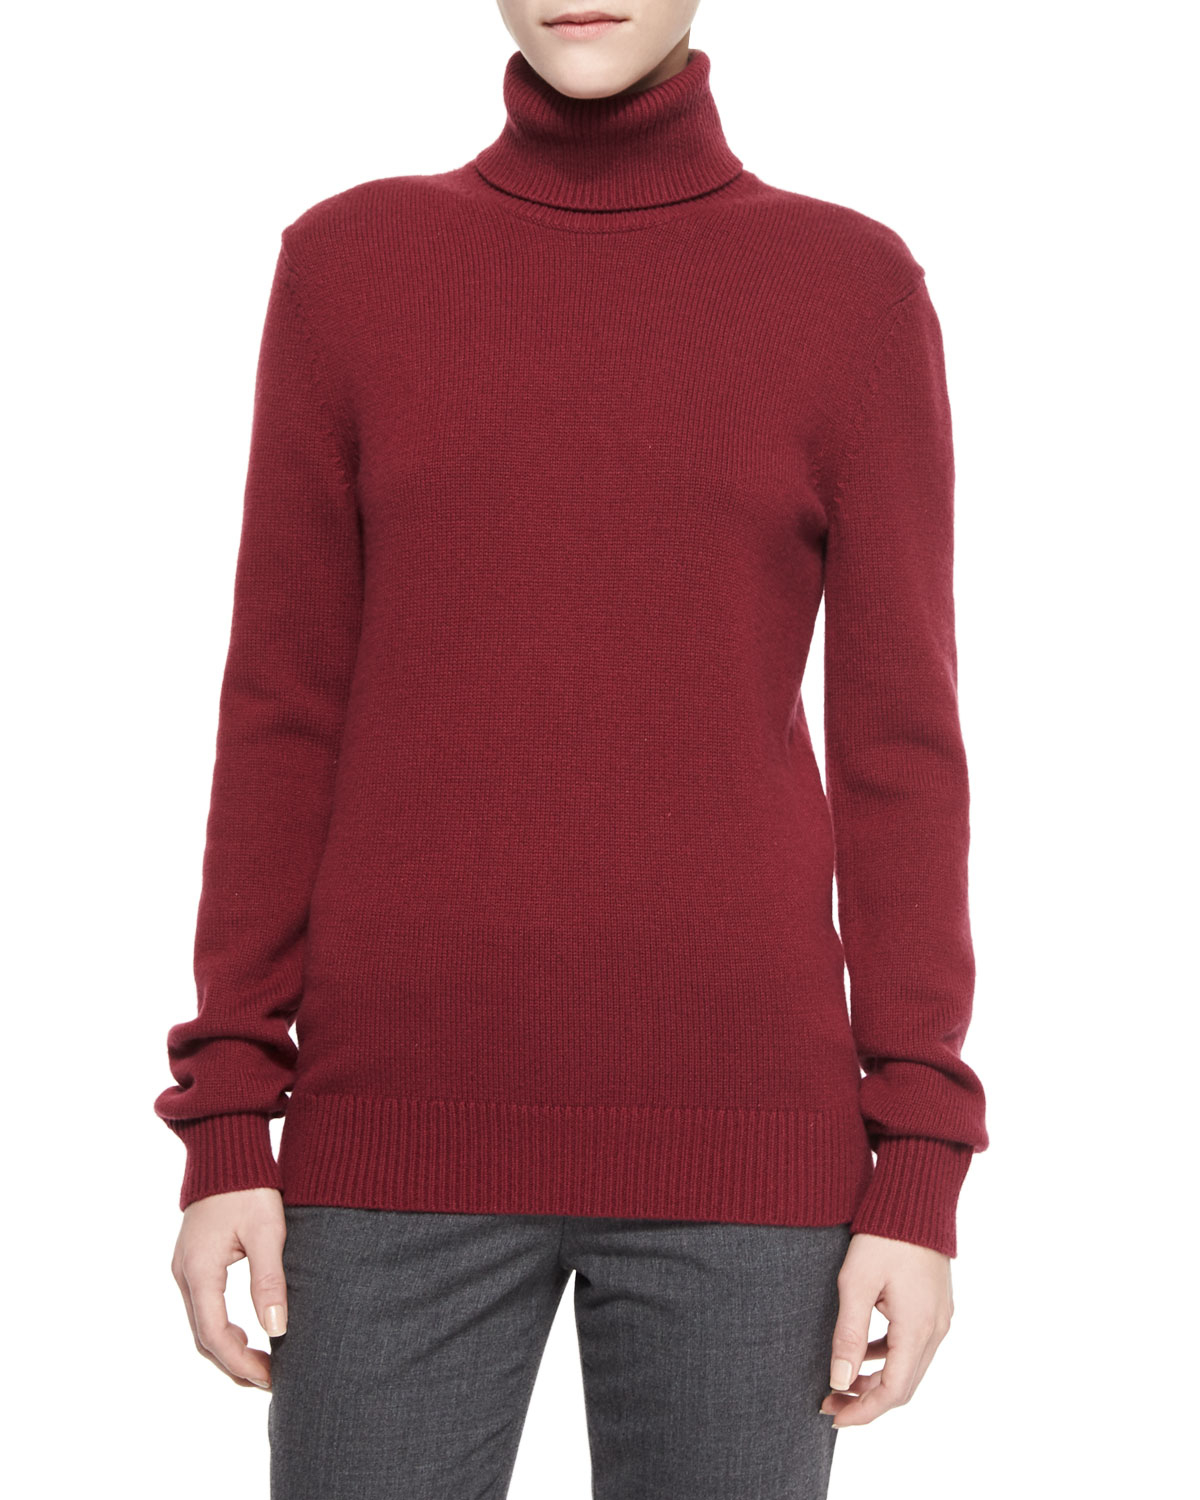 Michael kors Long-sleeve Cashmere Turtleneck Sweater in Red | Lyst